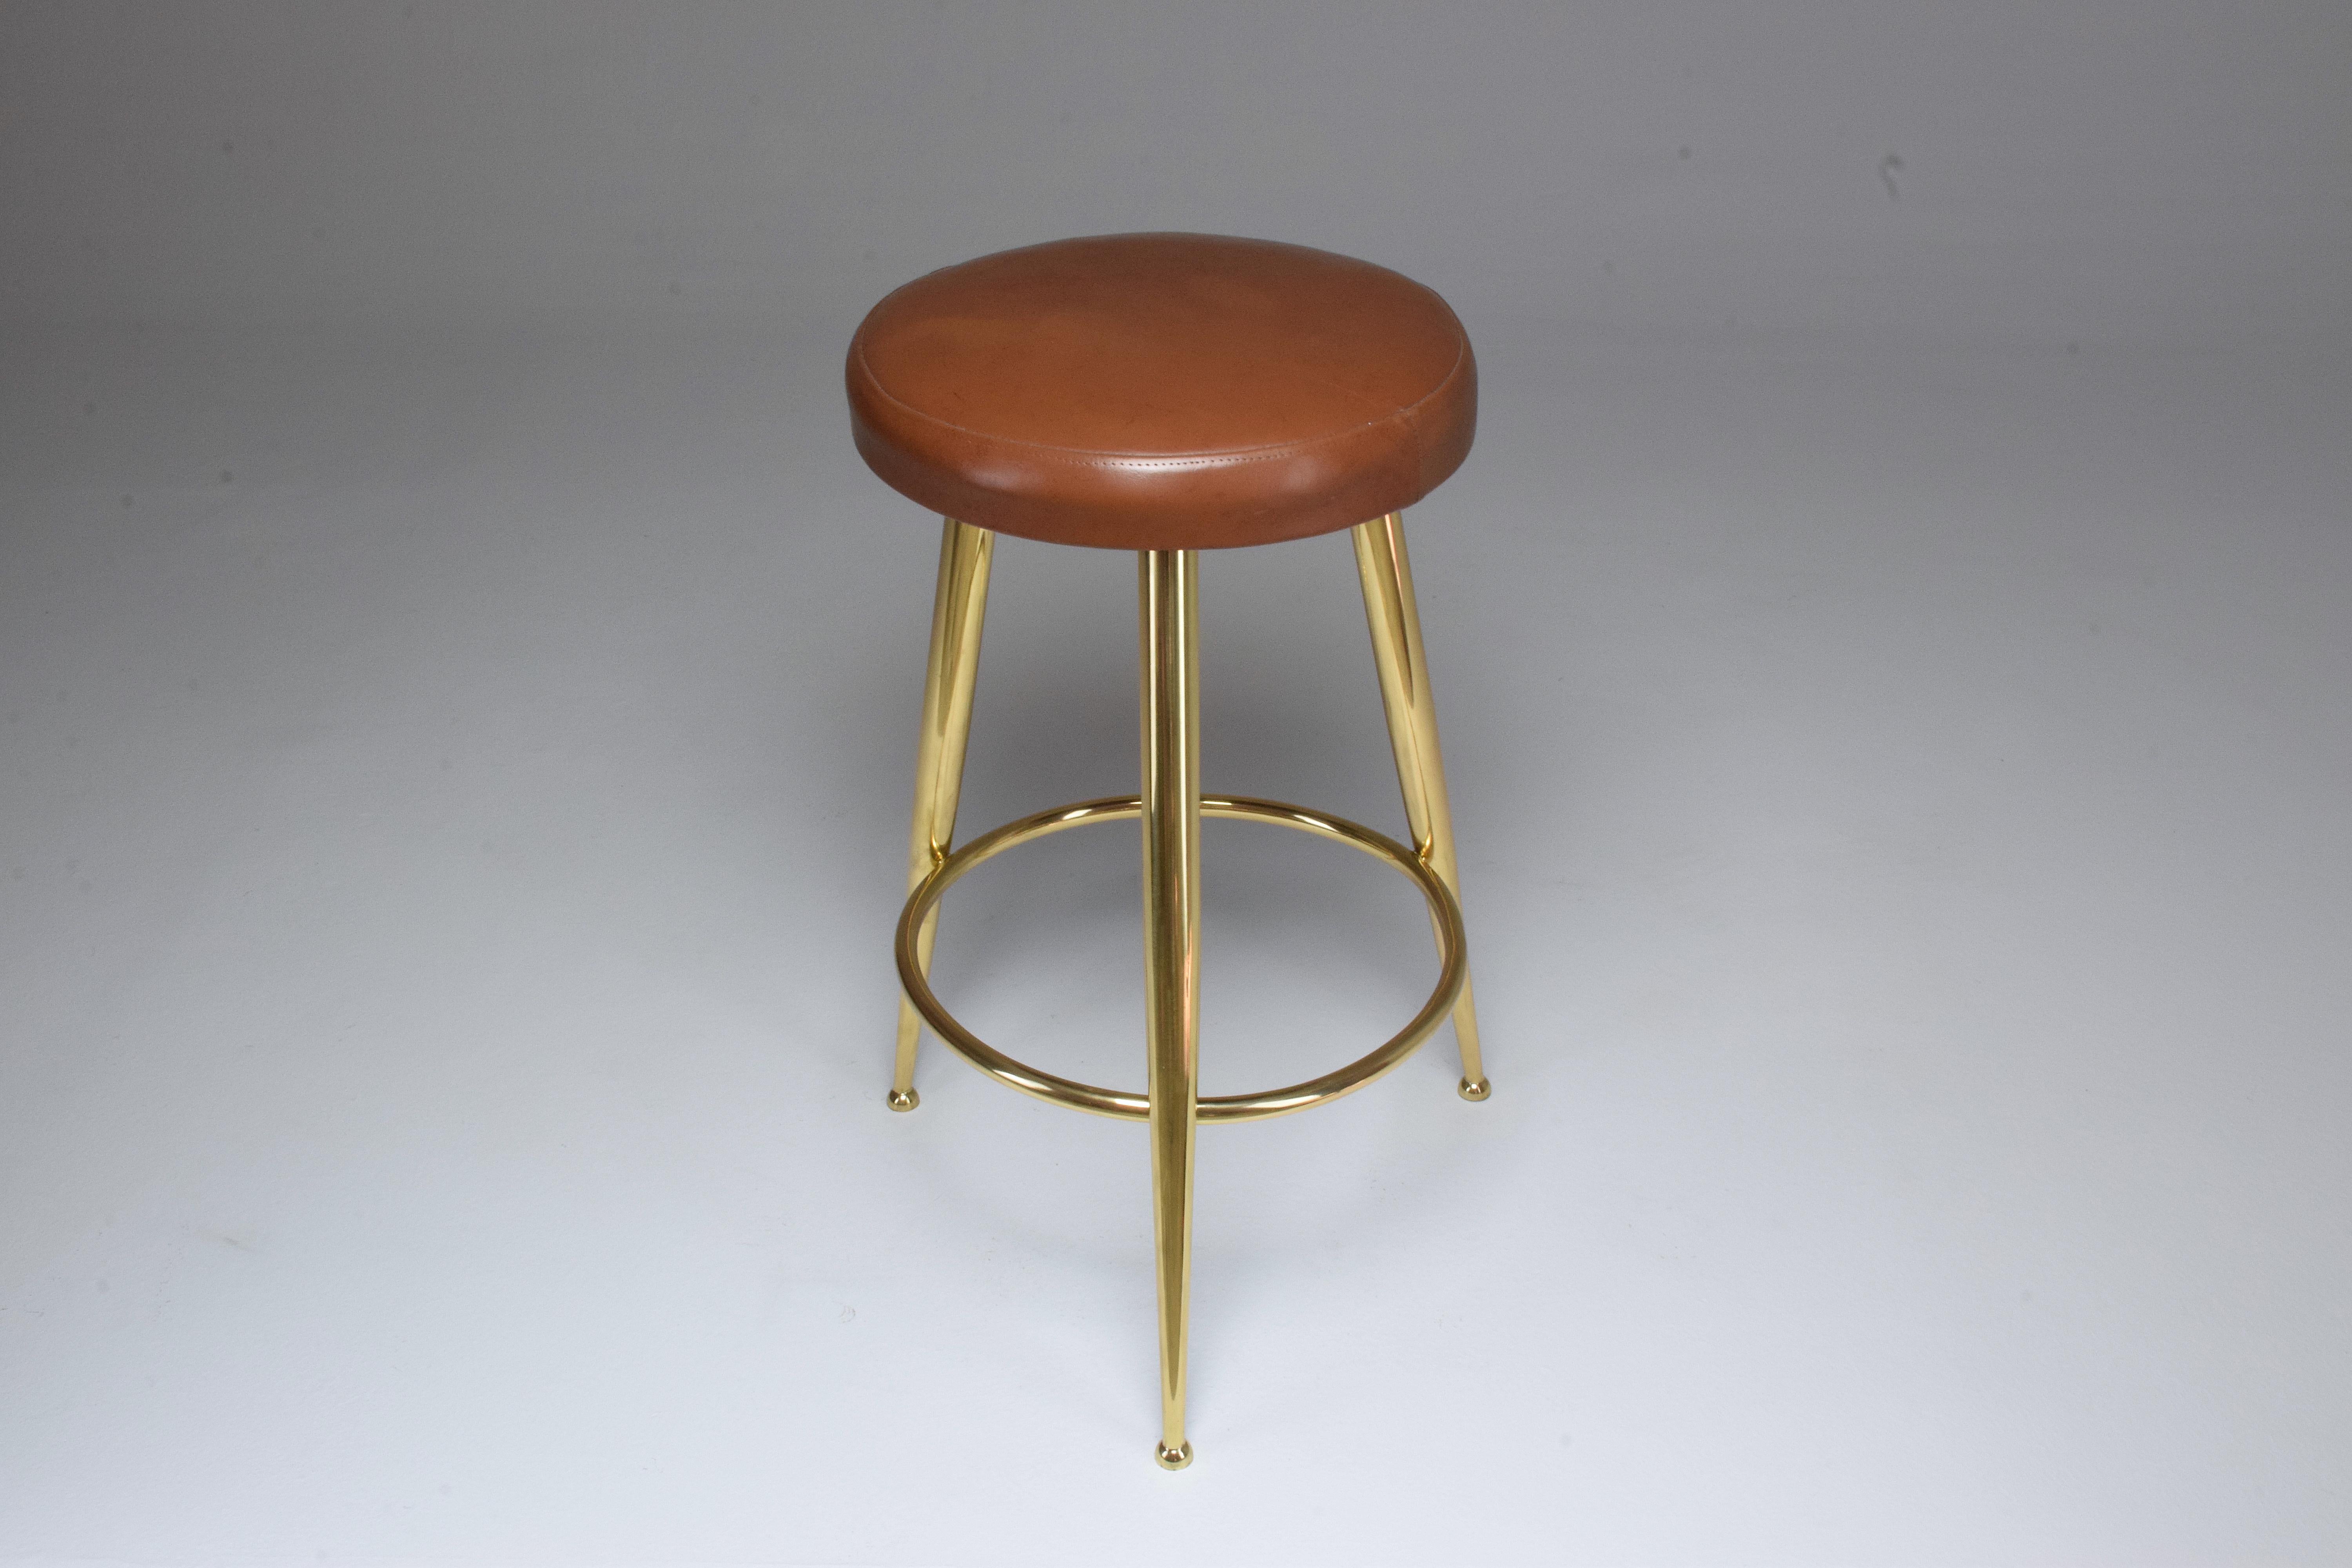 20th Century Italian Midcentury Brass and Leather Stool by Ico Parisi, 1950s 